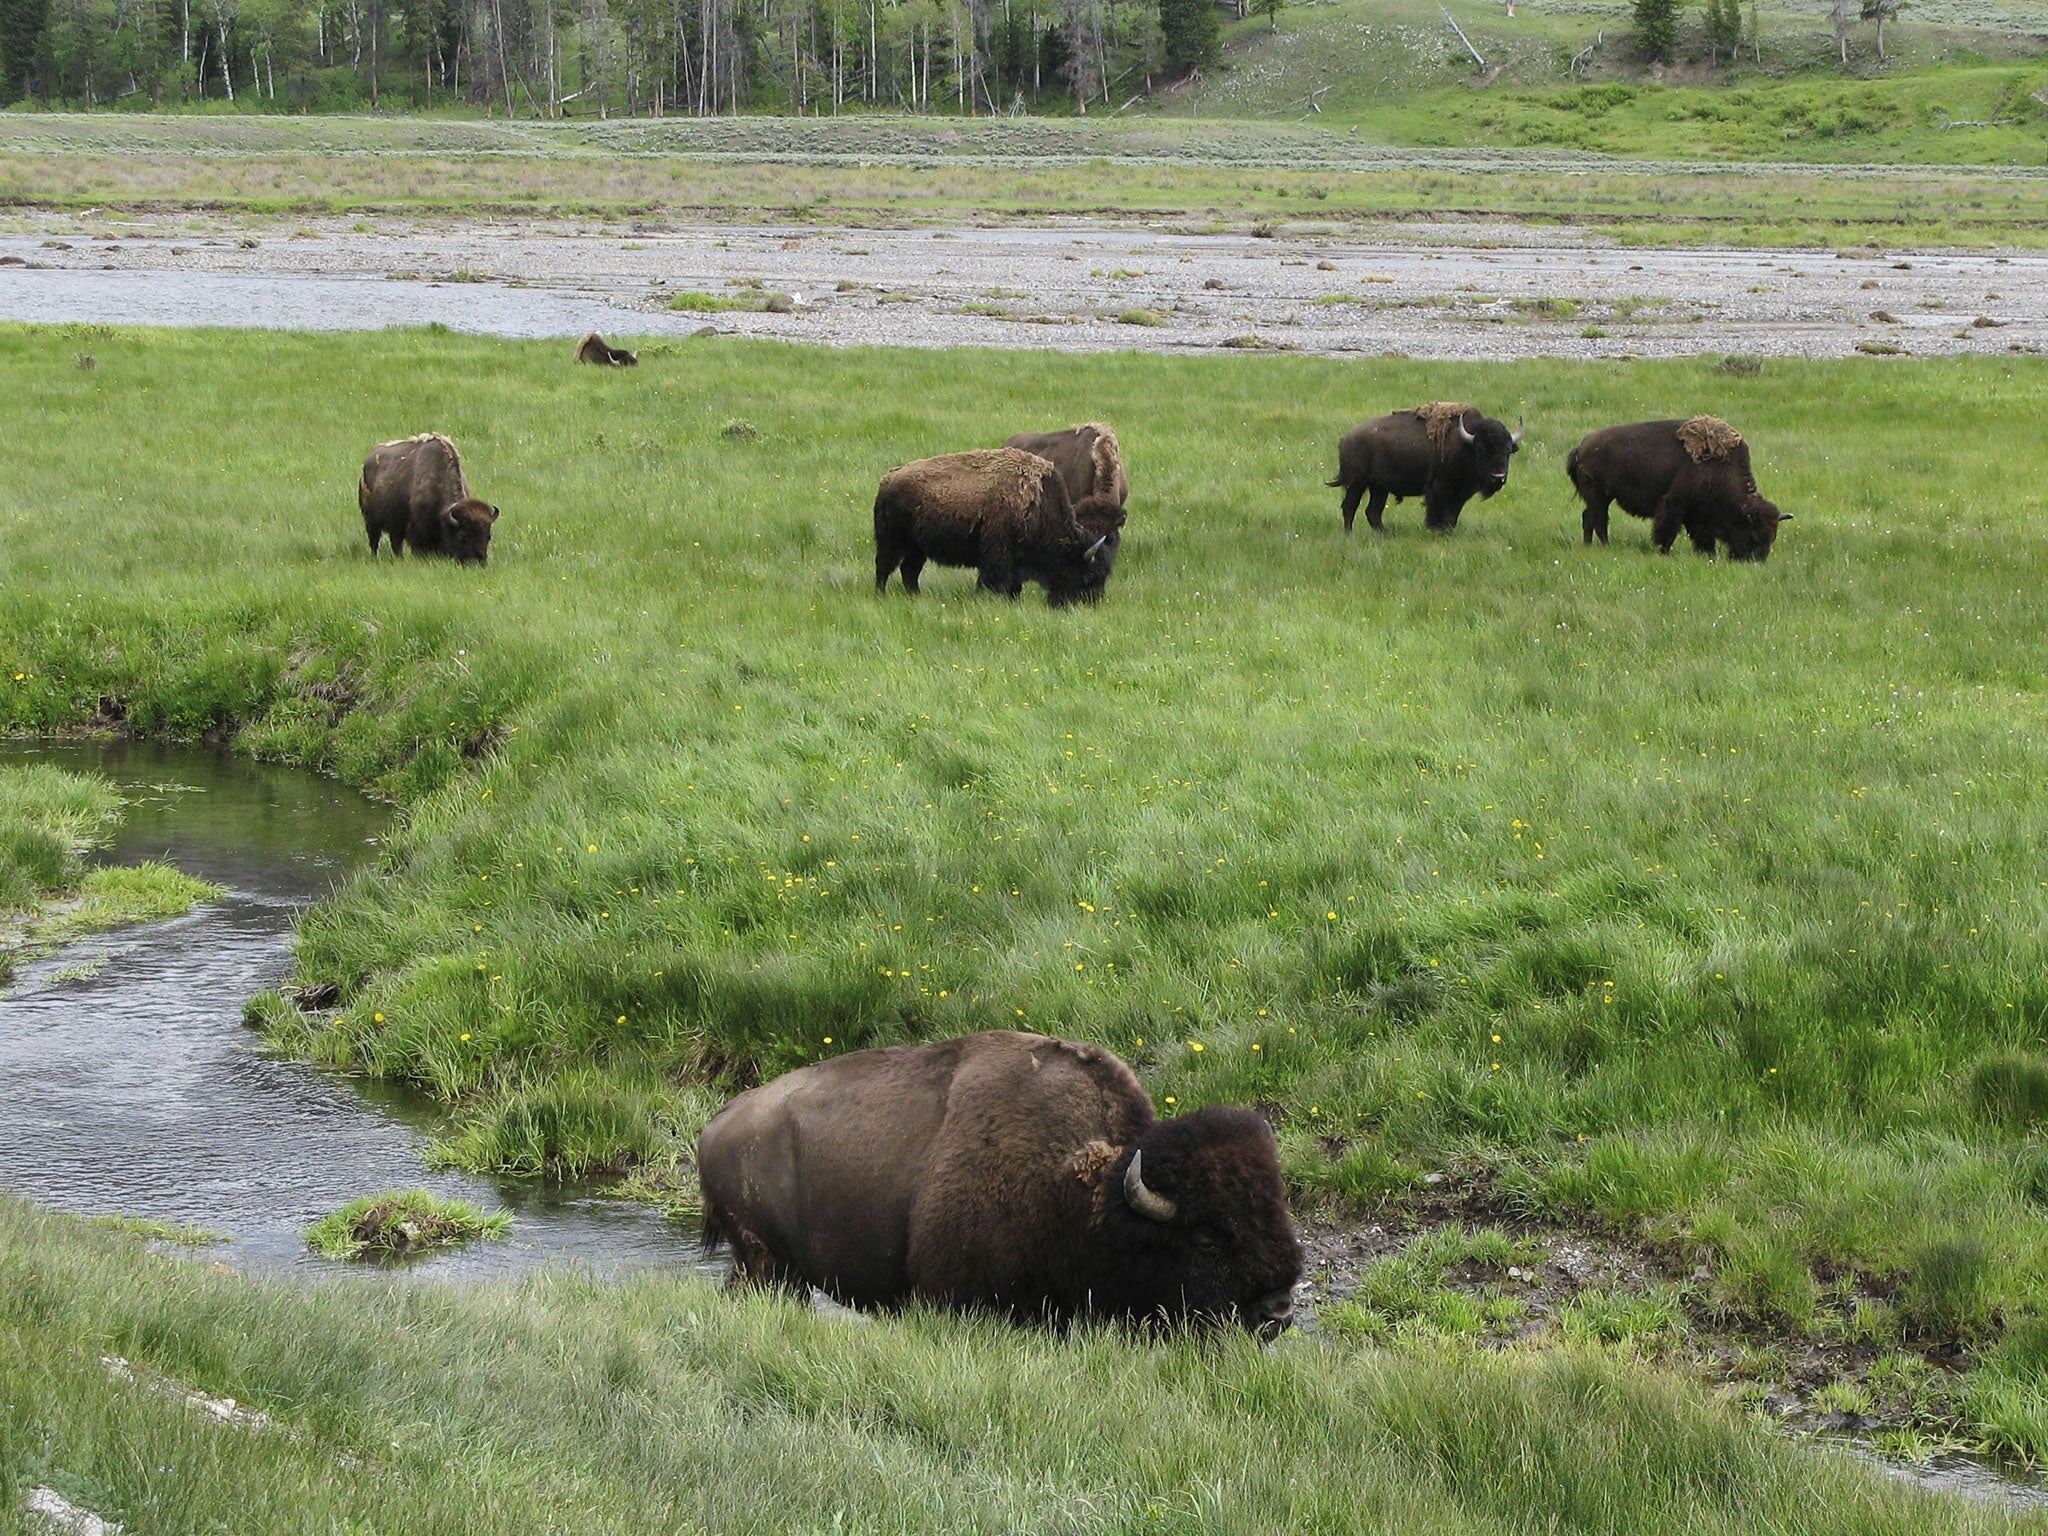 Bison may once again roam vast expanses of the American West